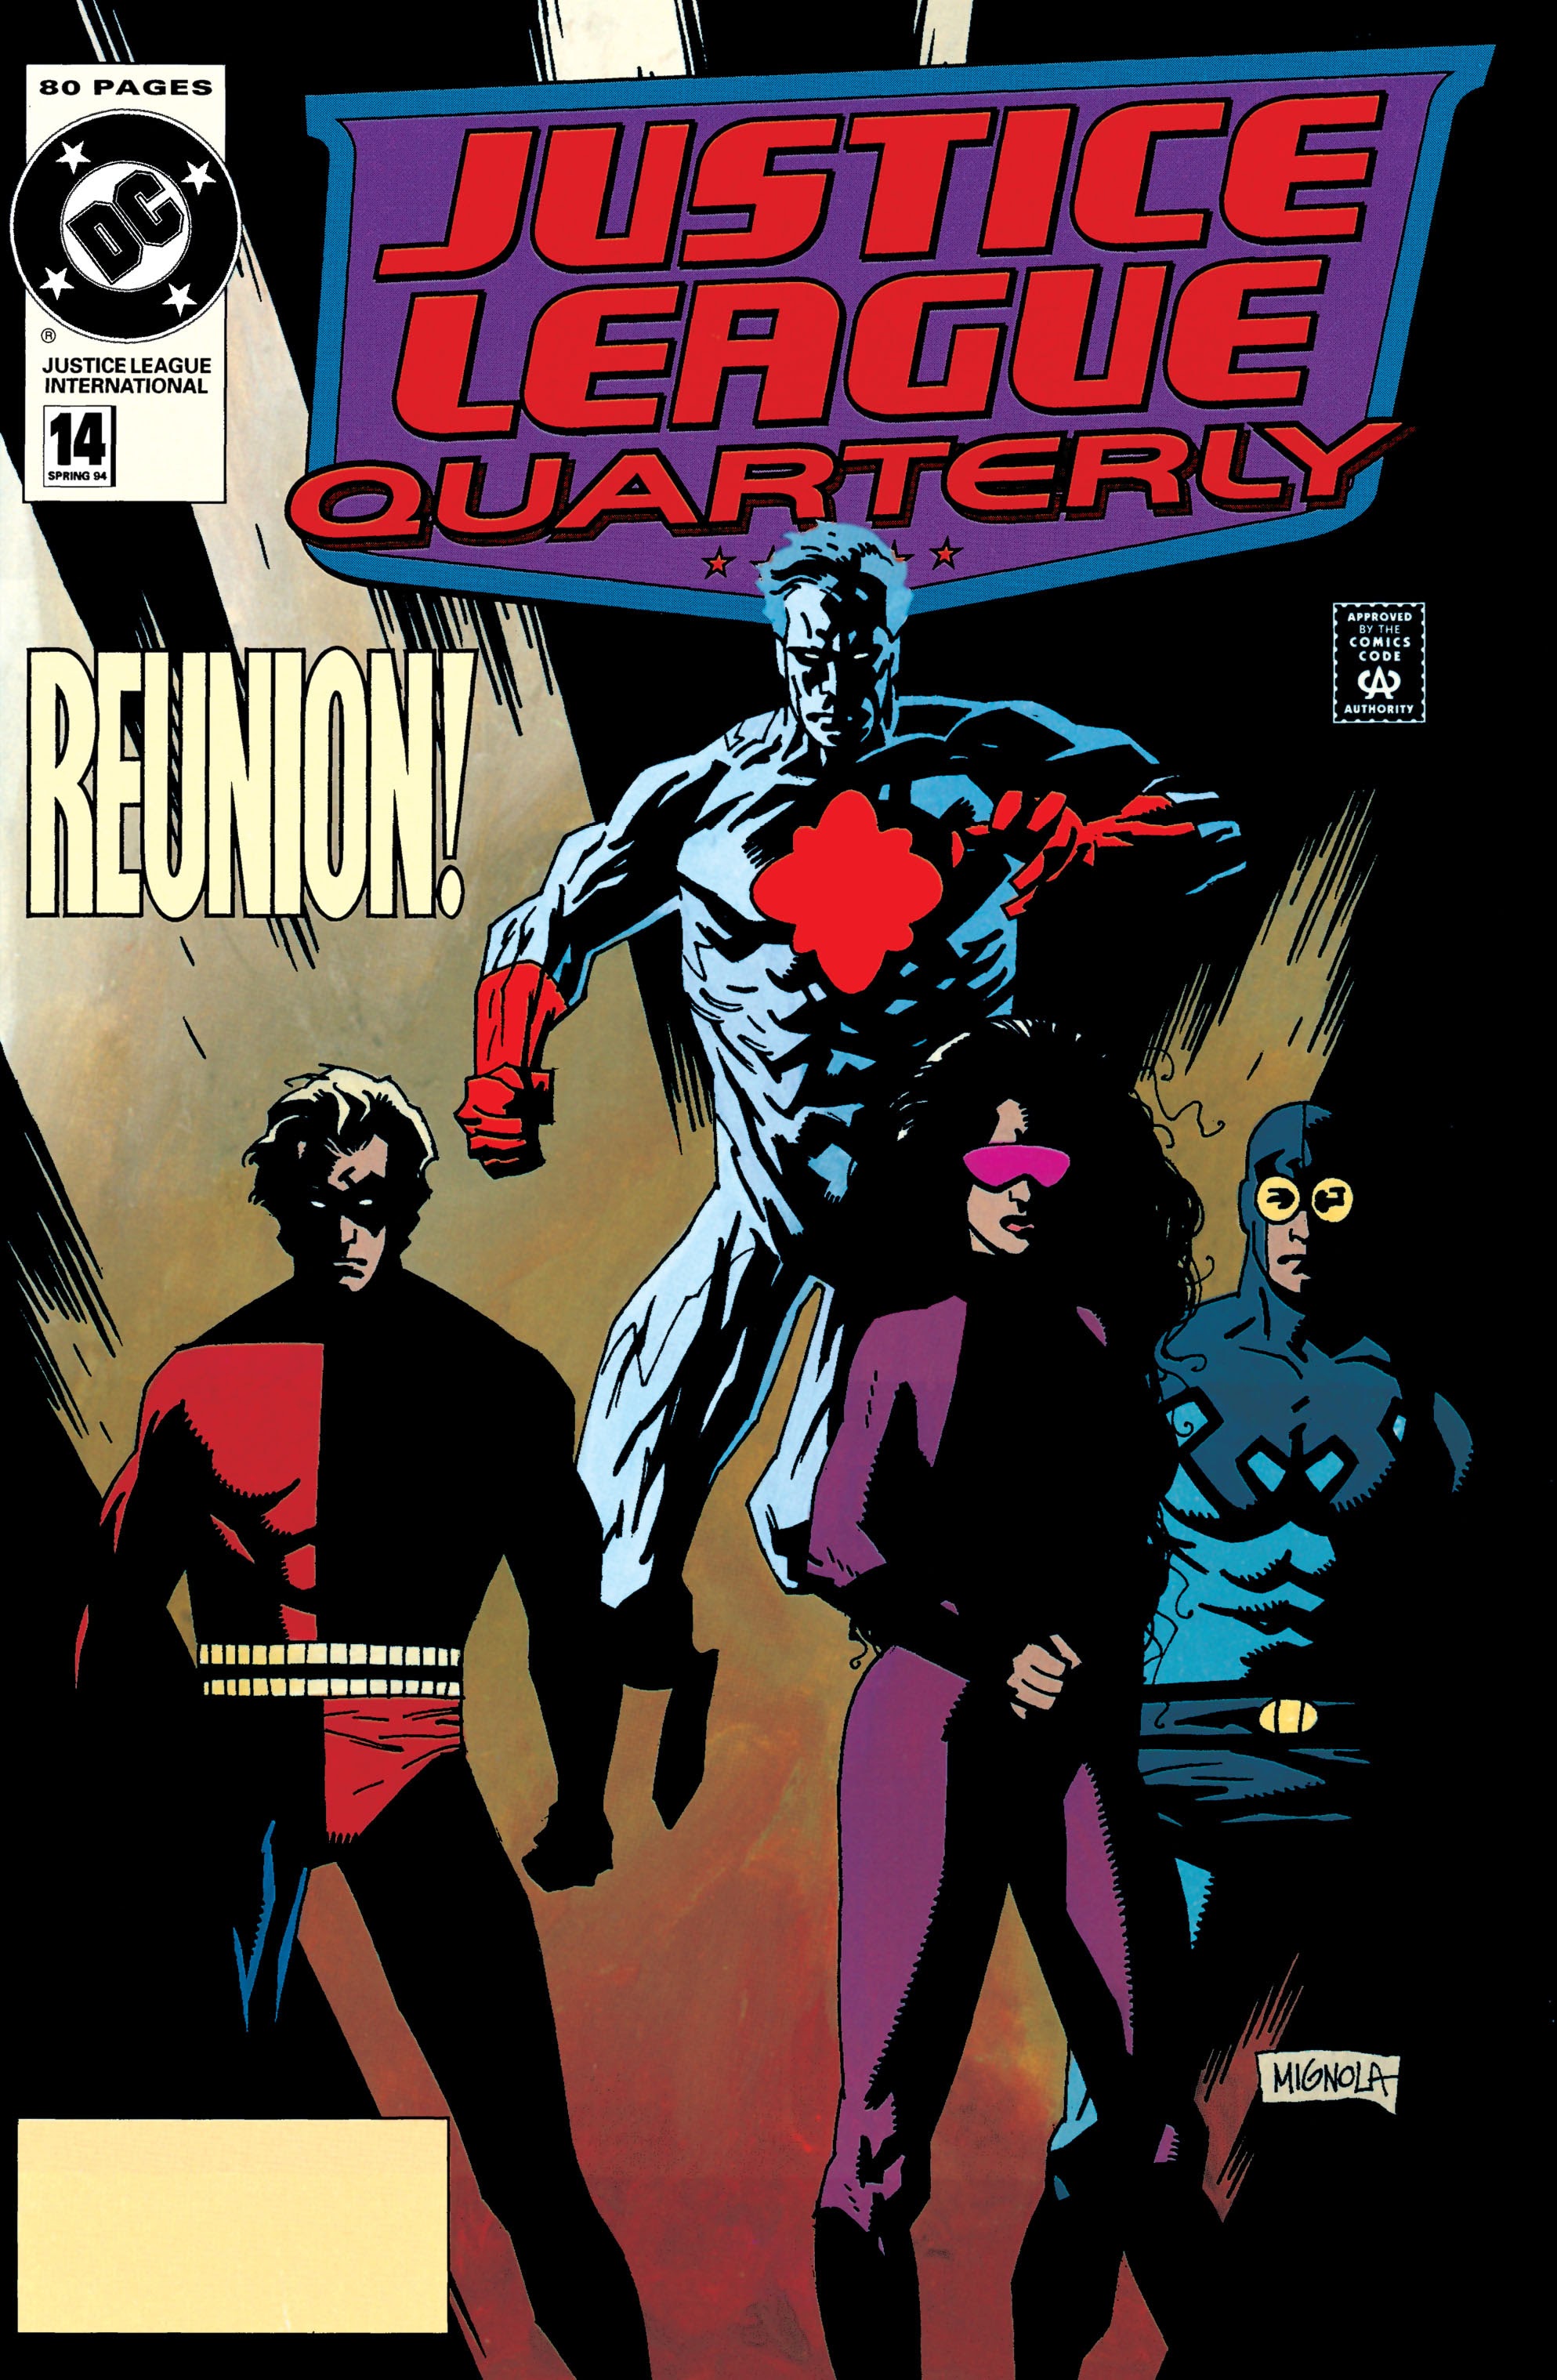 Read online Justice League Quarterly comic -  Issue #14 - 1